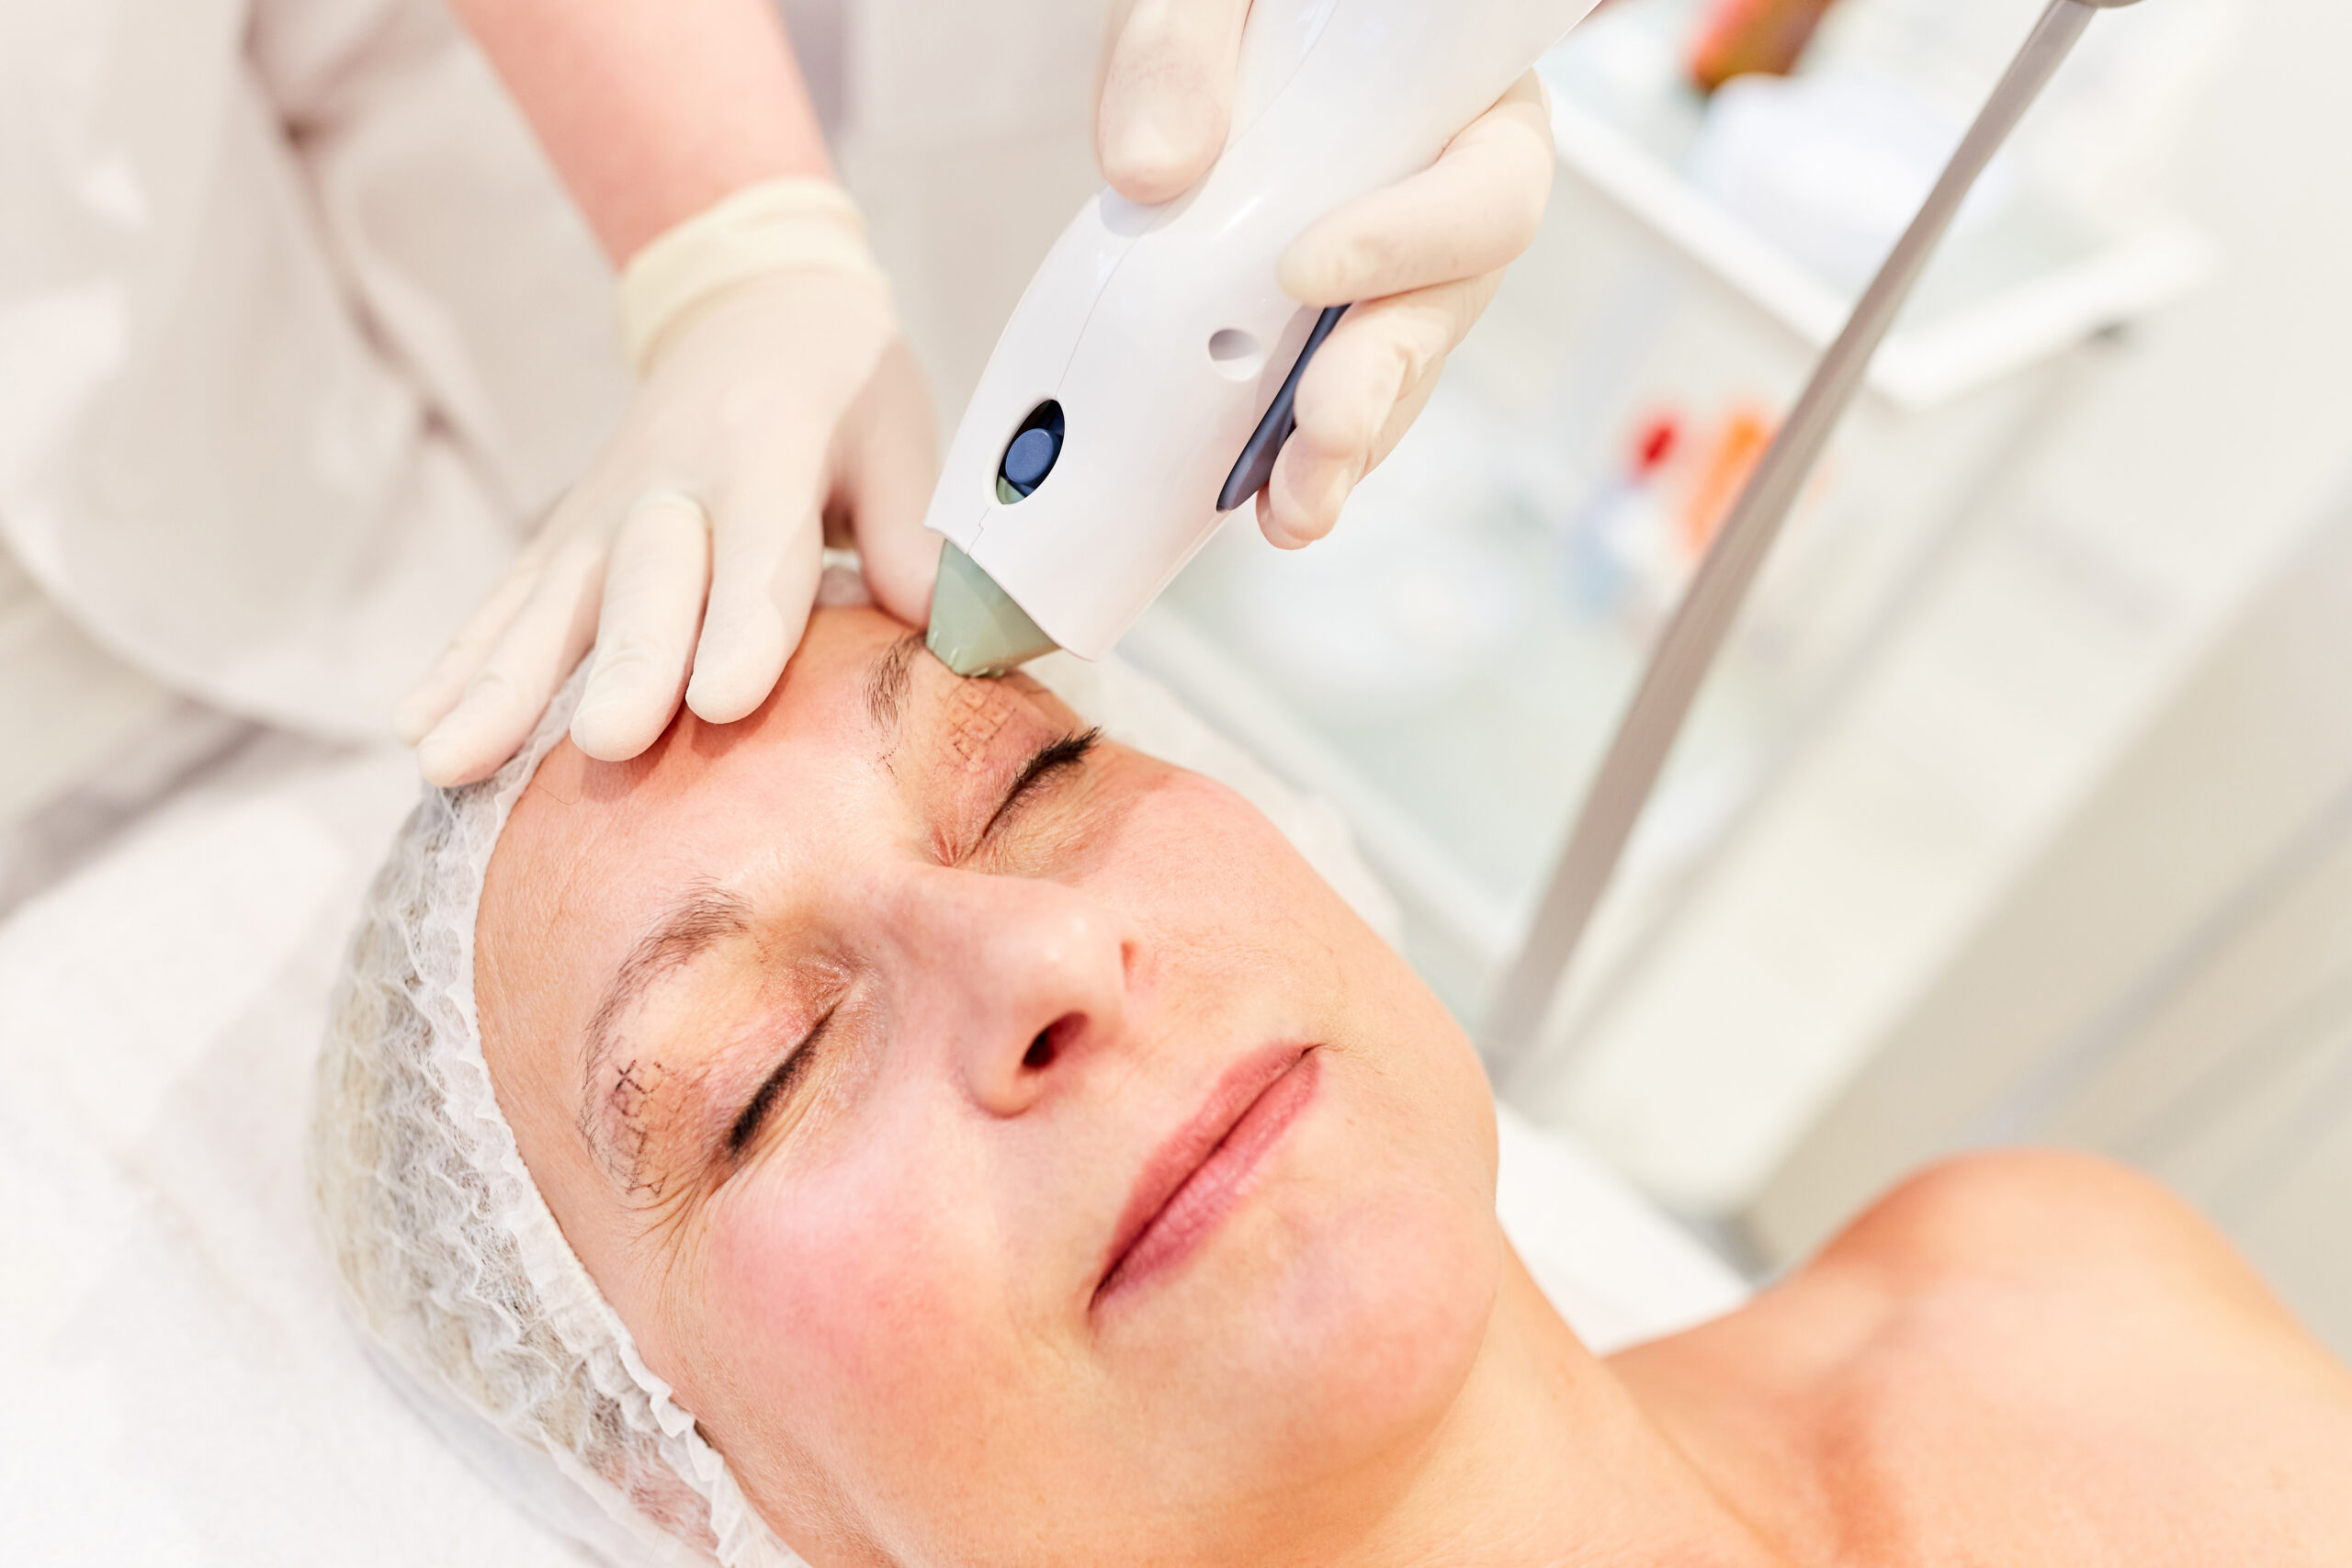 https://www.antiagingvancouver.com/wp-content/uploads/2023/02/Thermage-Skin-tightening-Anti-Aging-Clinic-scaled.jpg